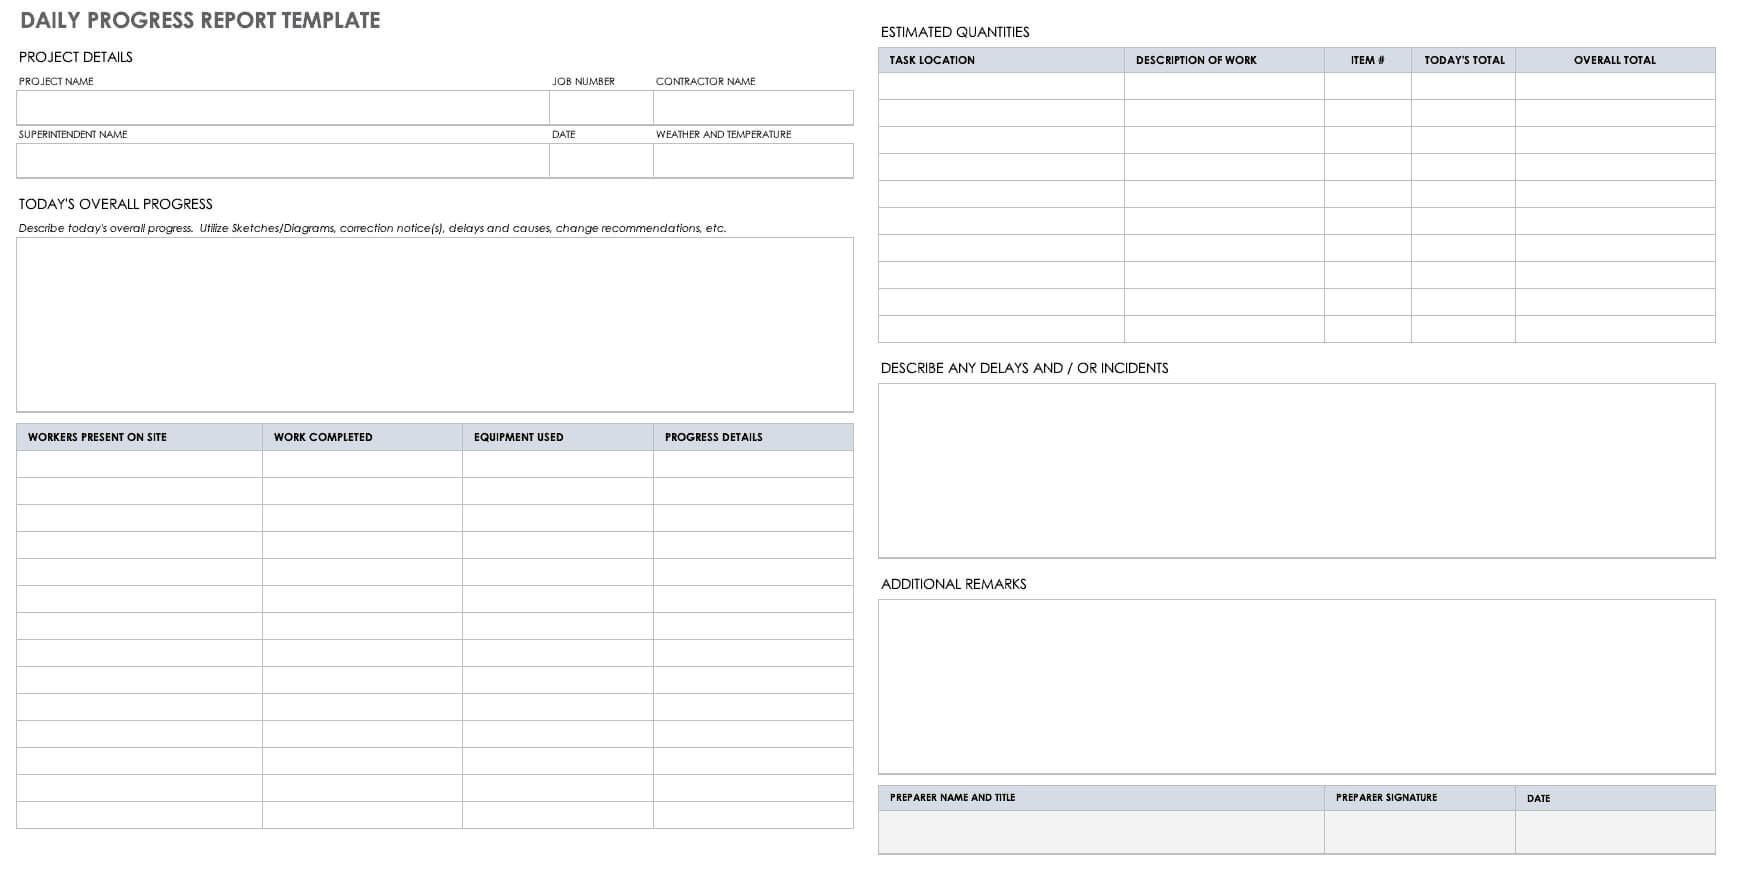 Free Project Report Templates | Smartsheet With Regard To Daily Project Status Report Template